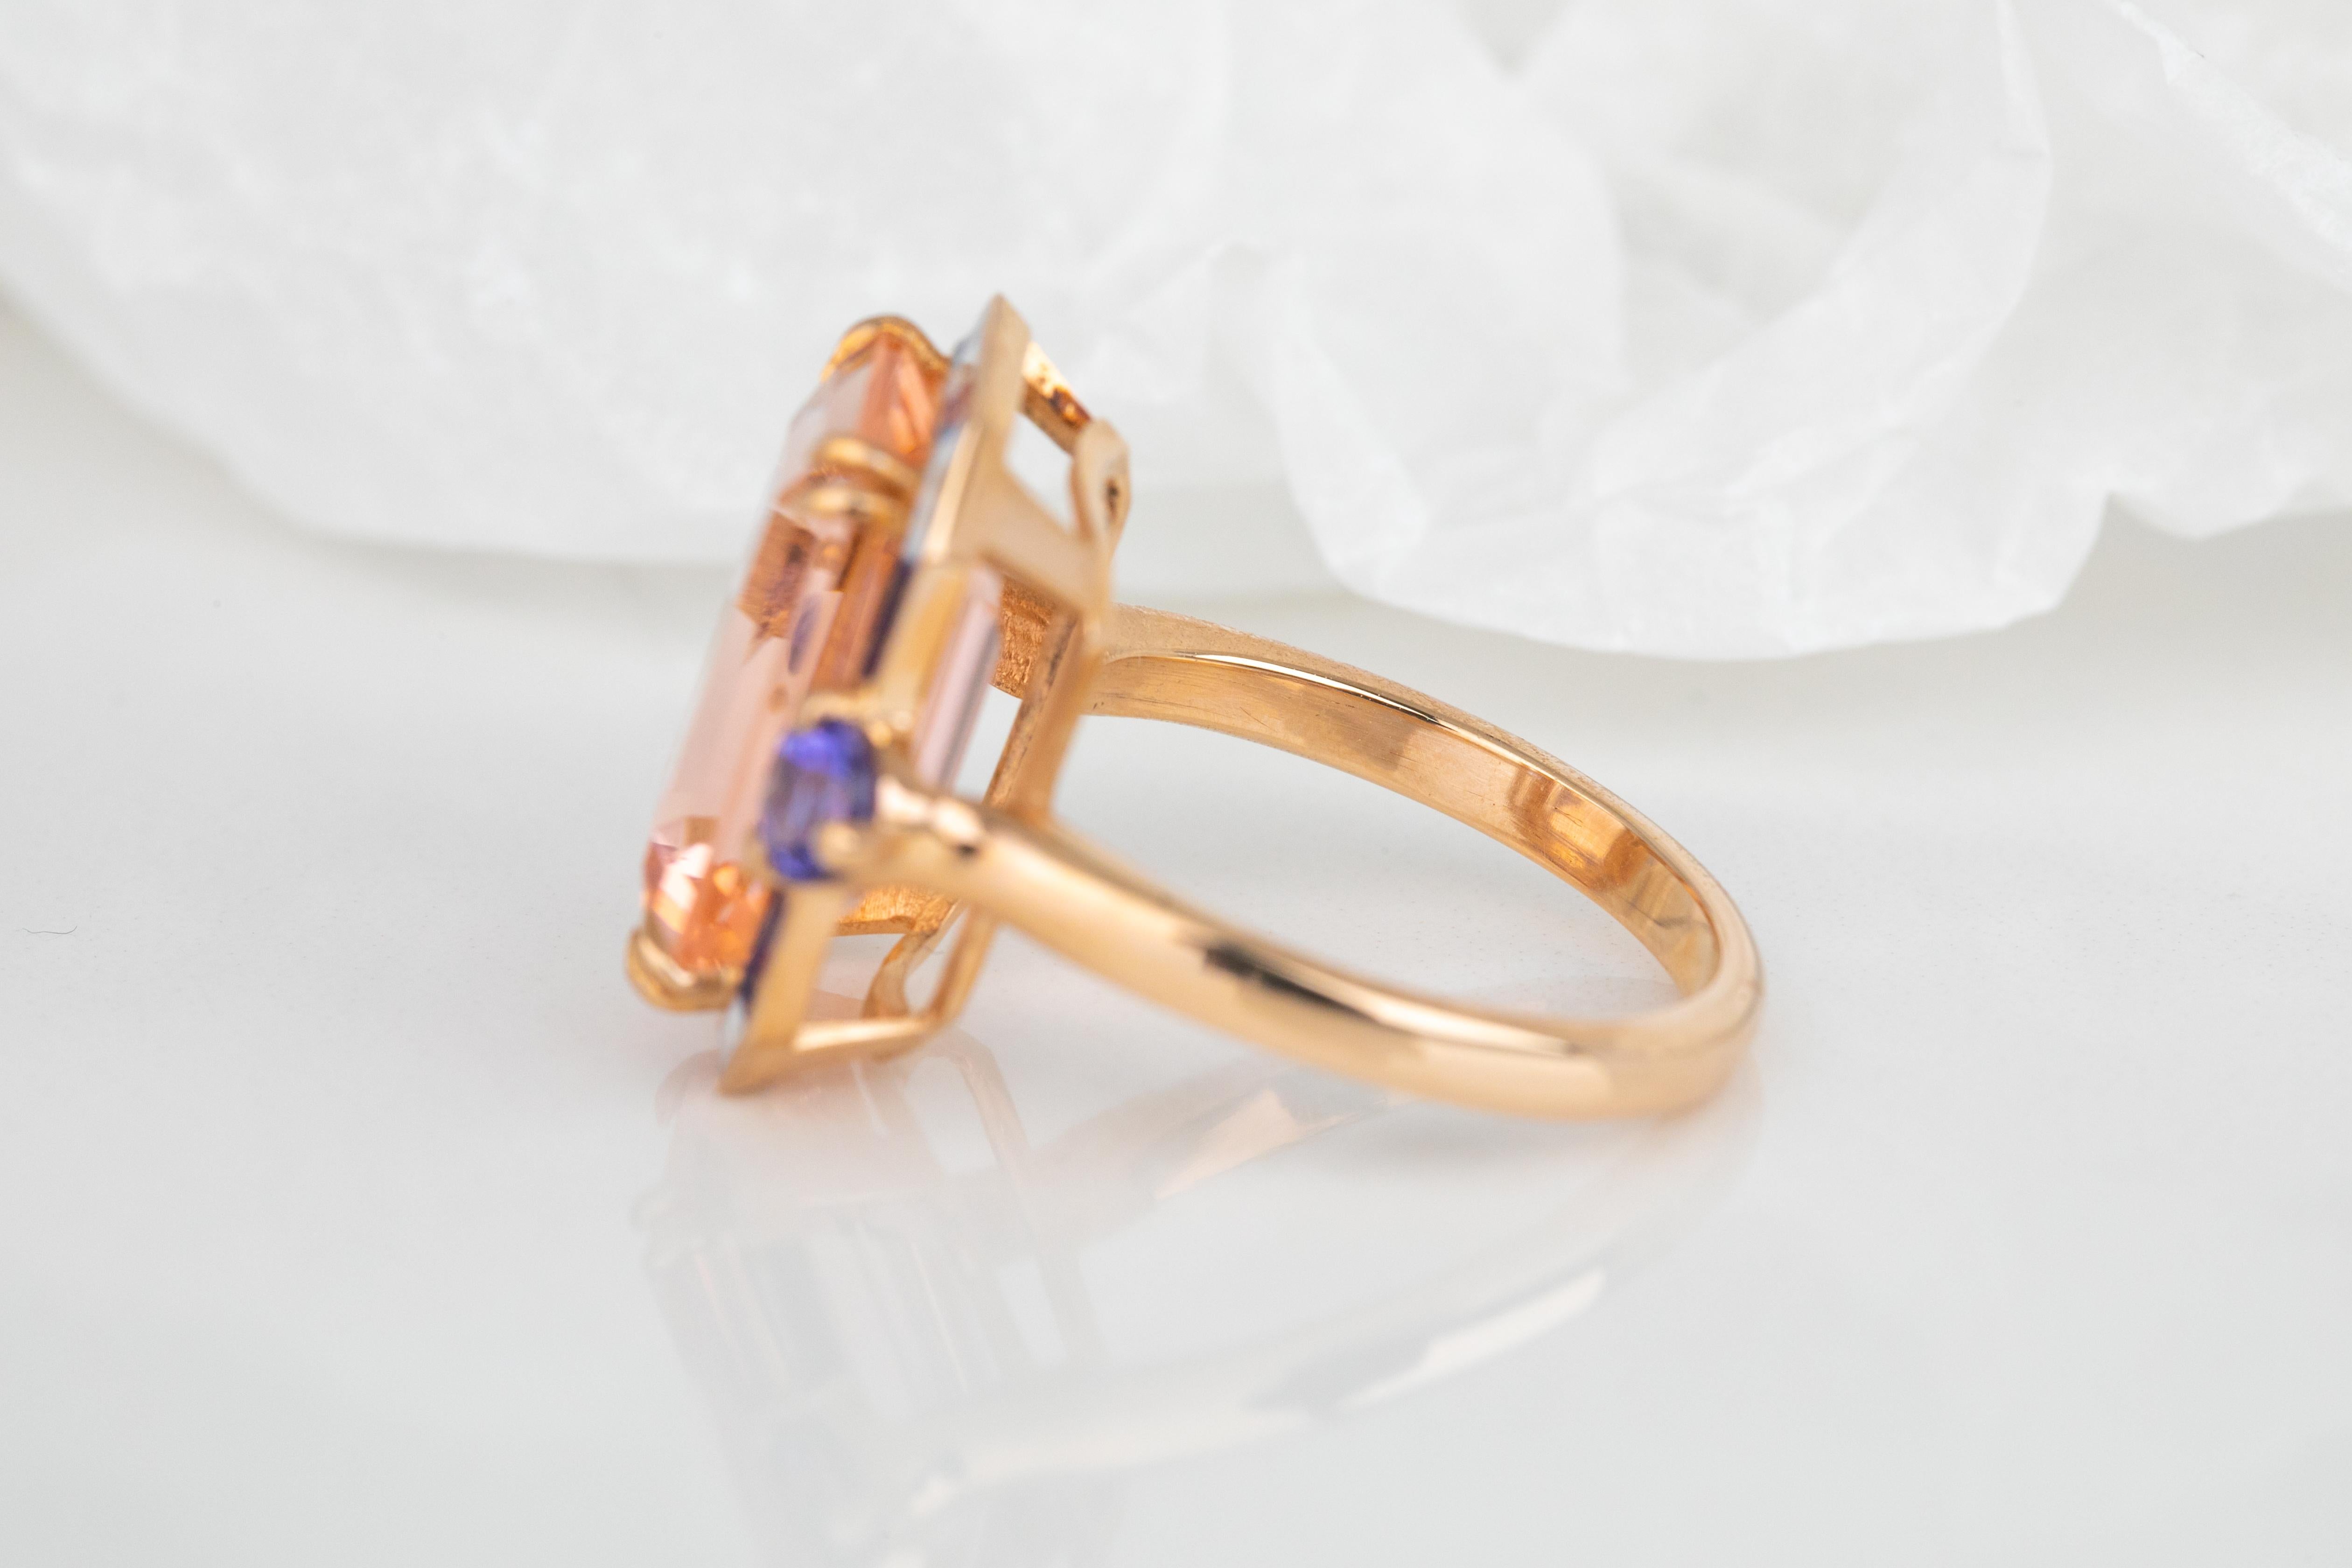 For Sale:  Art Deco Style 14k Solid Gold, Pink Quartz and Ceylon Sapphire Stone Ring 5